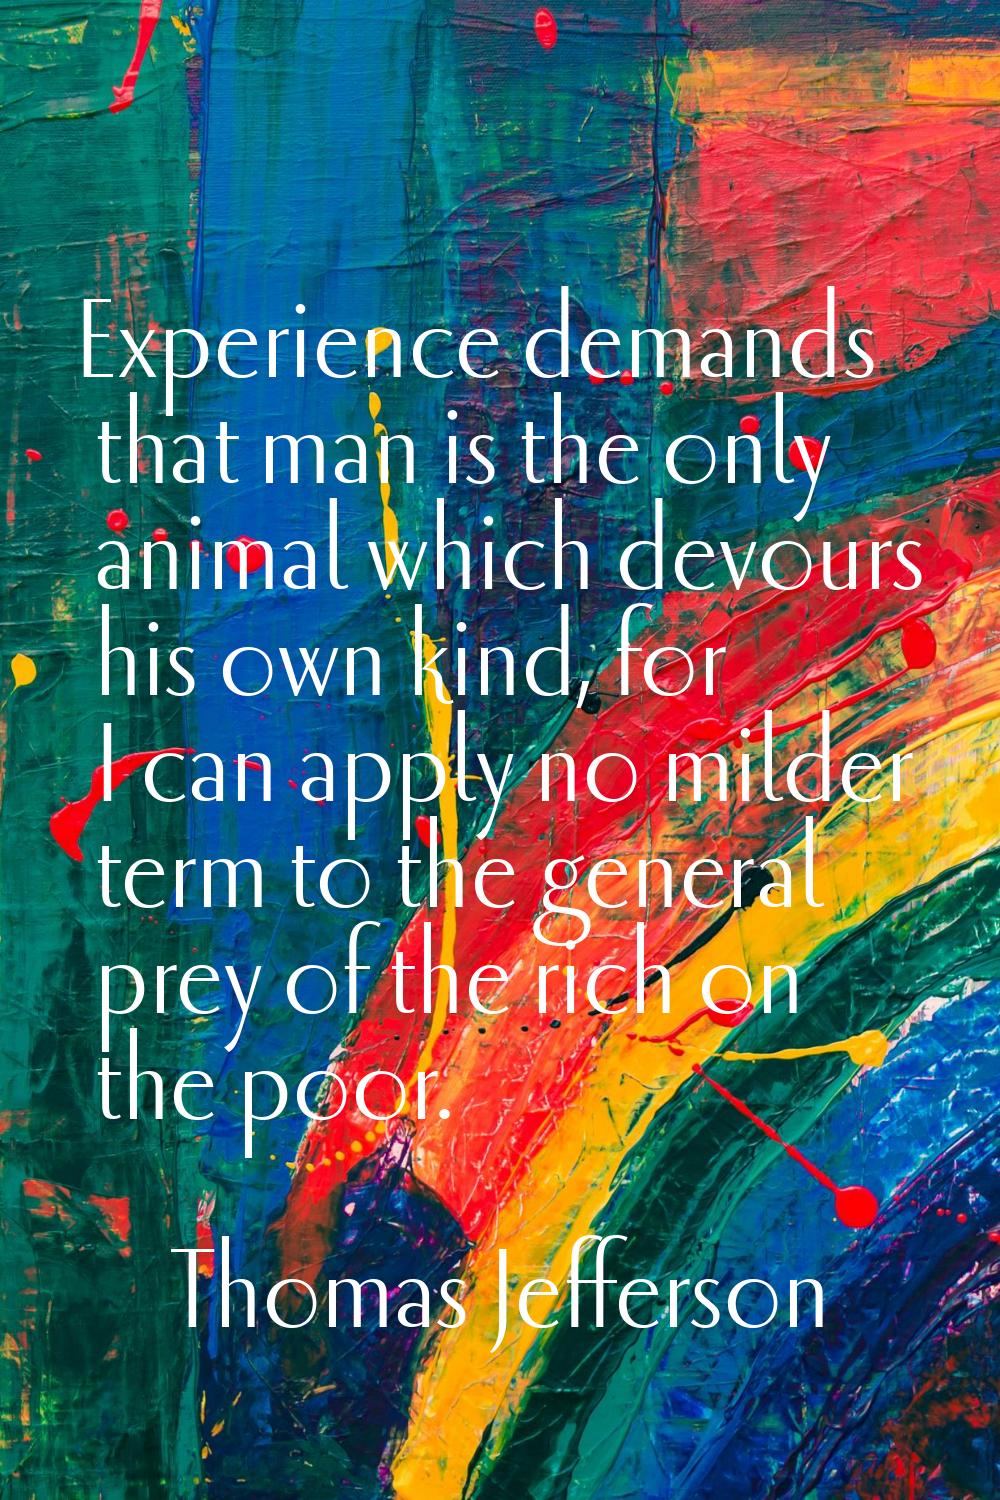 Experience demands that man is the only animal which devours his own kind, for I can apply no milde